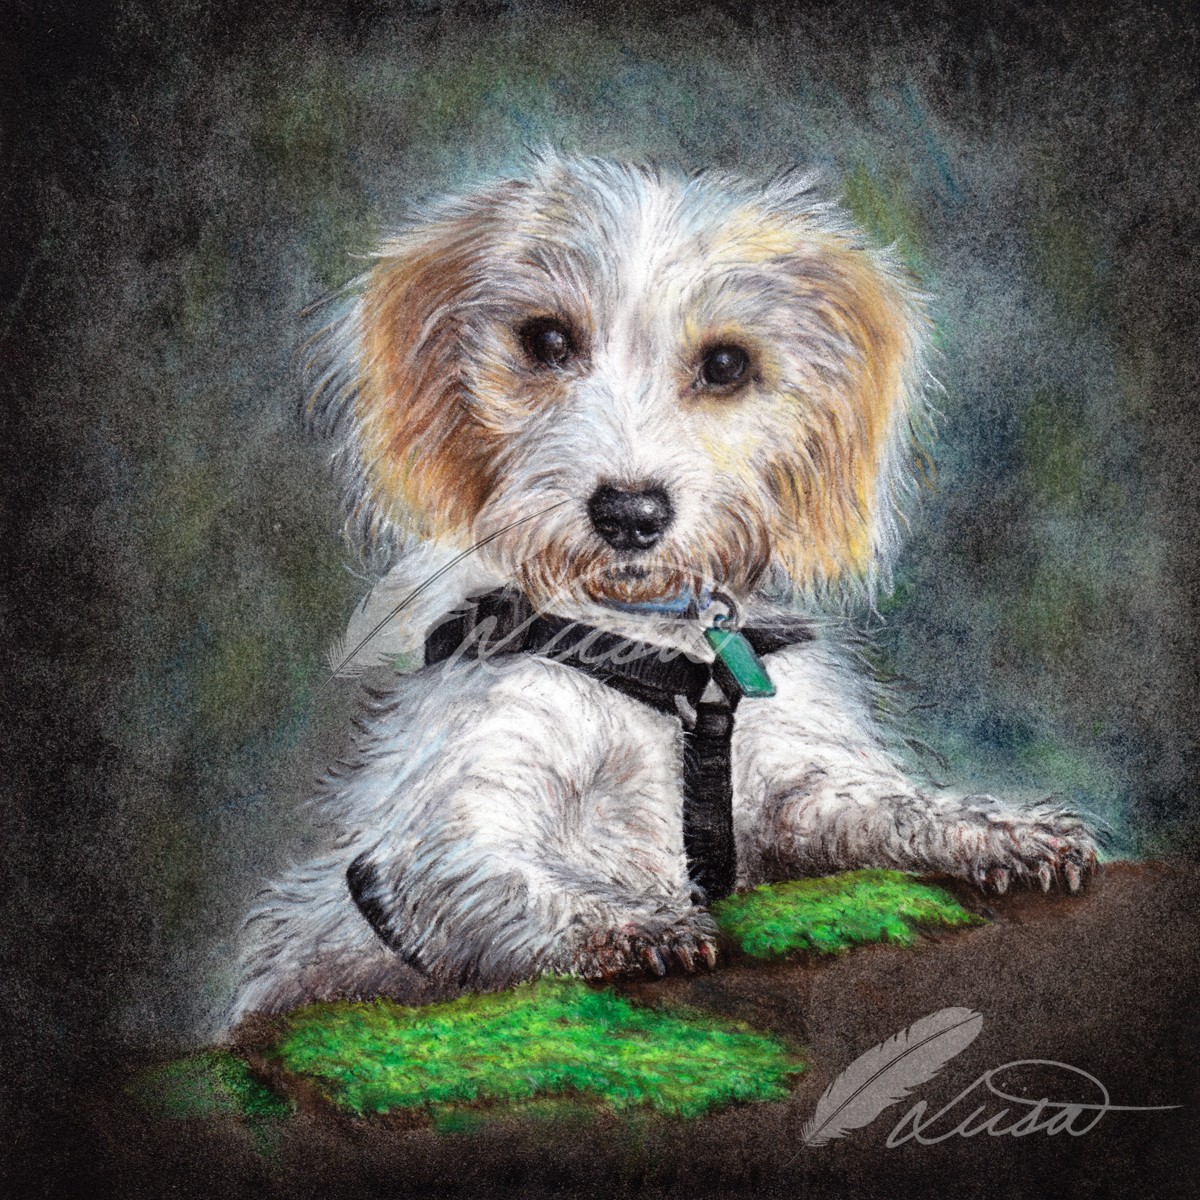 Commission of Scruffy Puppy by Liisa Clark